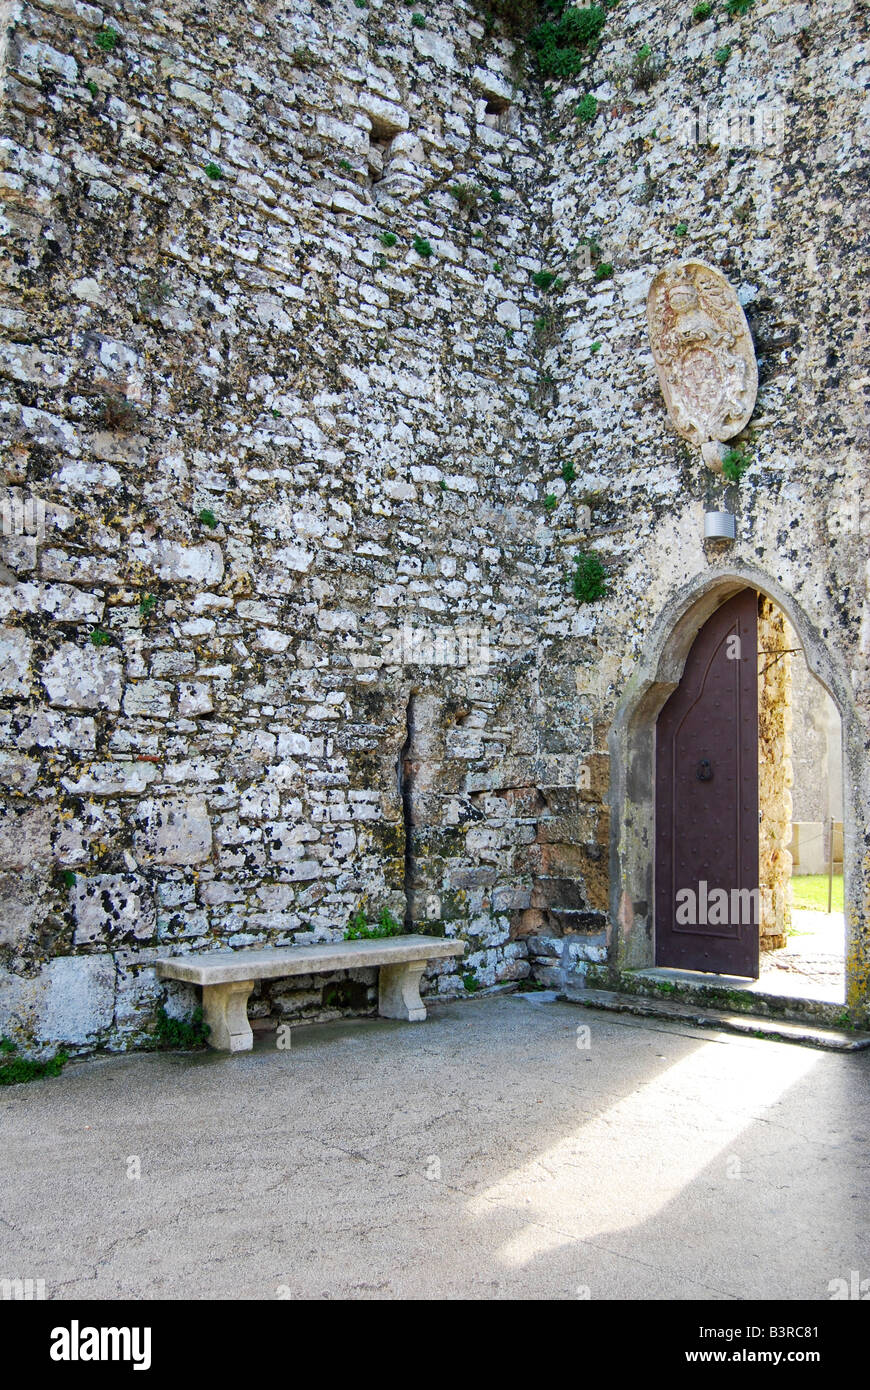 An empty bench next to a half open door in a castle wall Stock Photo